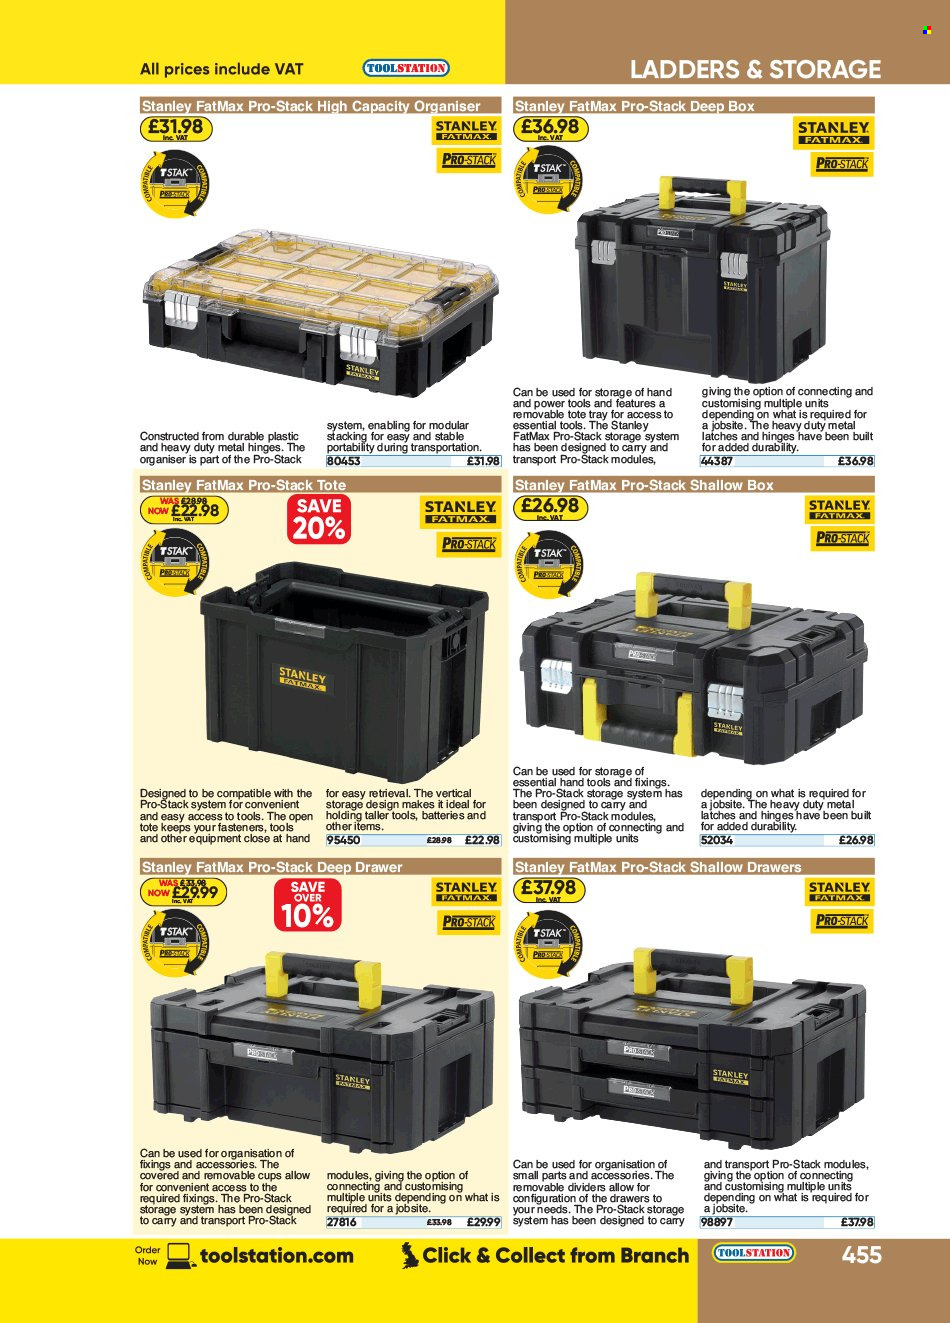 Toolstation offer . Page 455.